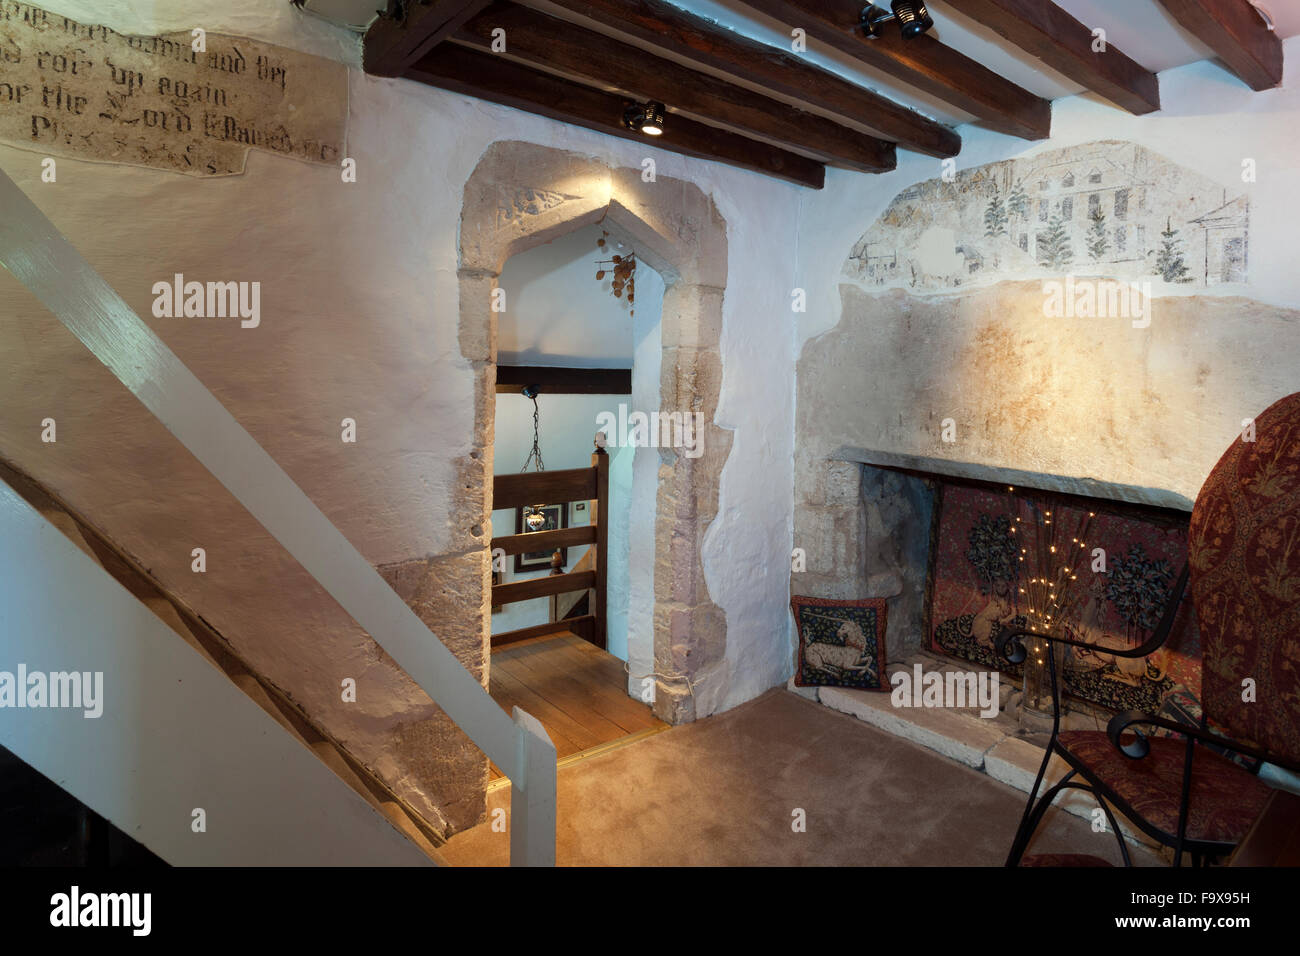 Historic religious text and mural exposed and preserved in an old Cotswold cottage, Gloucestershire, England, UK Stock Photo